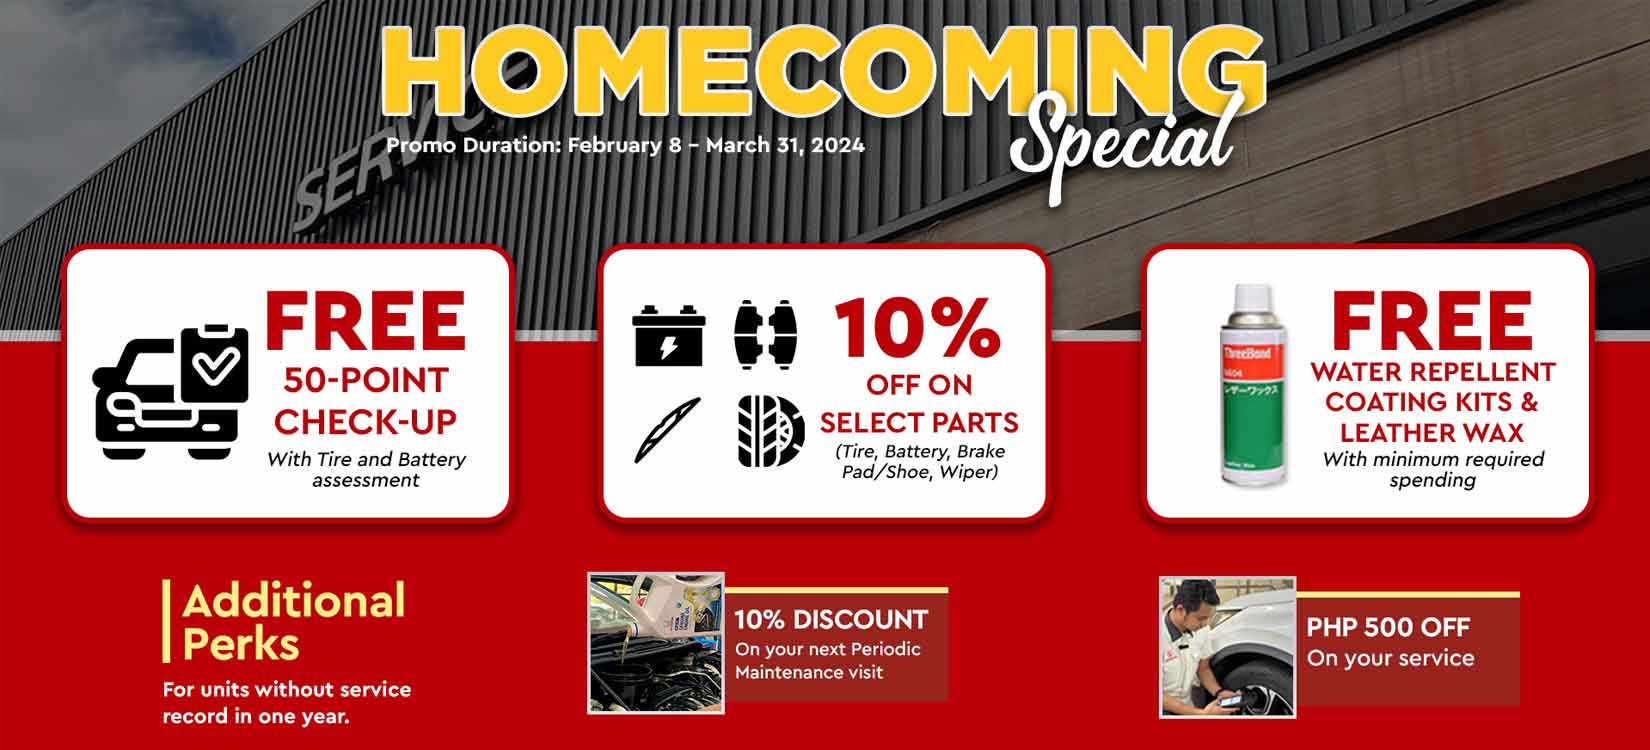 Cut Down on Car Maintenance Costs with Honda’s Service Homecoming Special Promo!